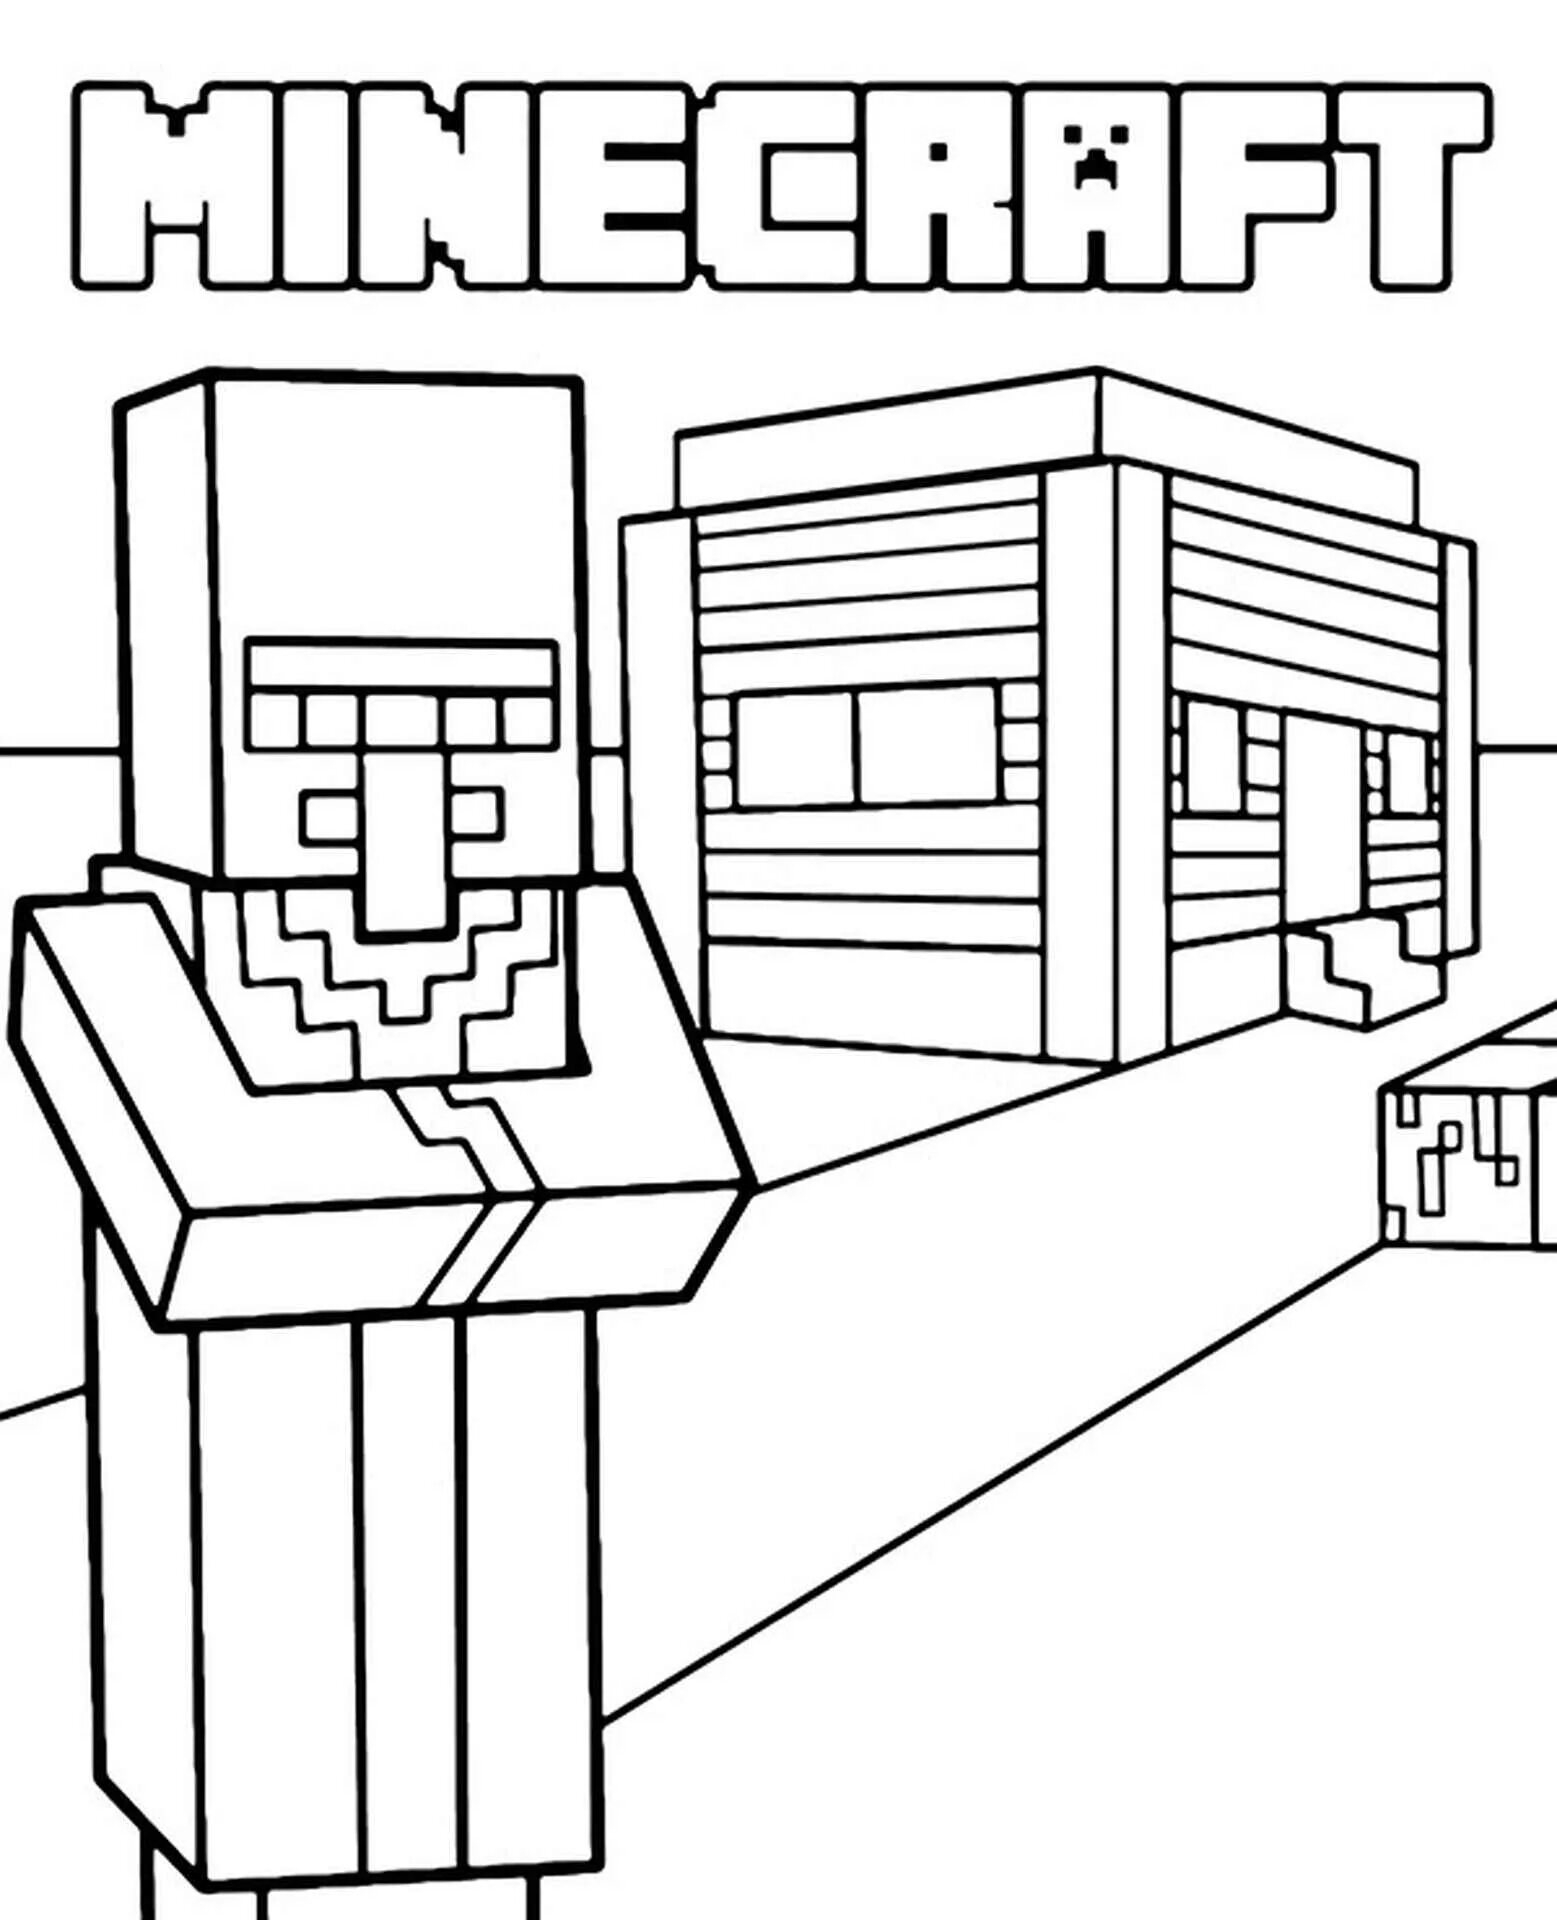 Coloring pages for minecraft residents: land of surprises